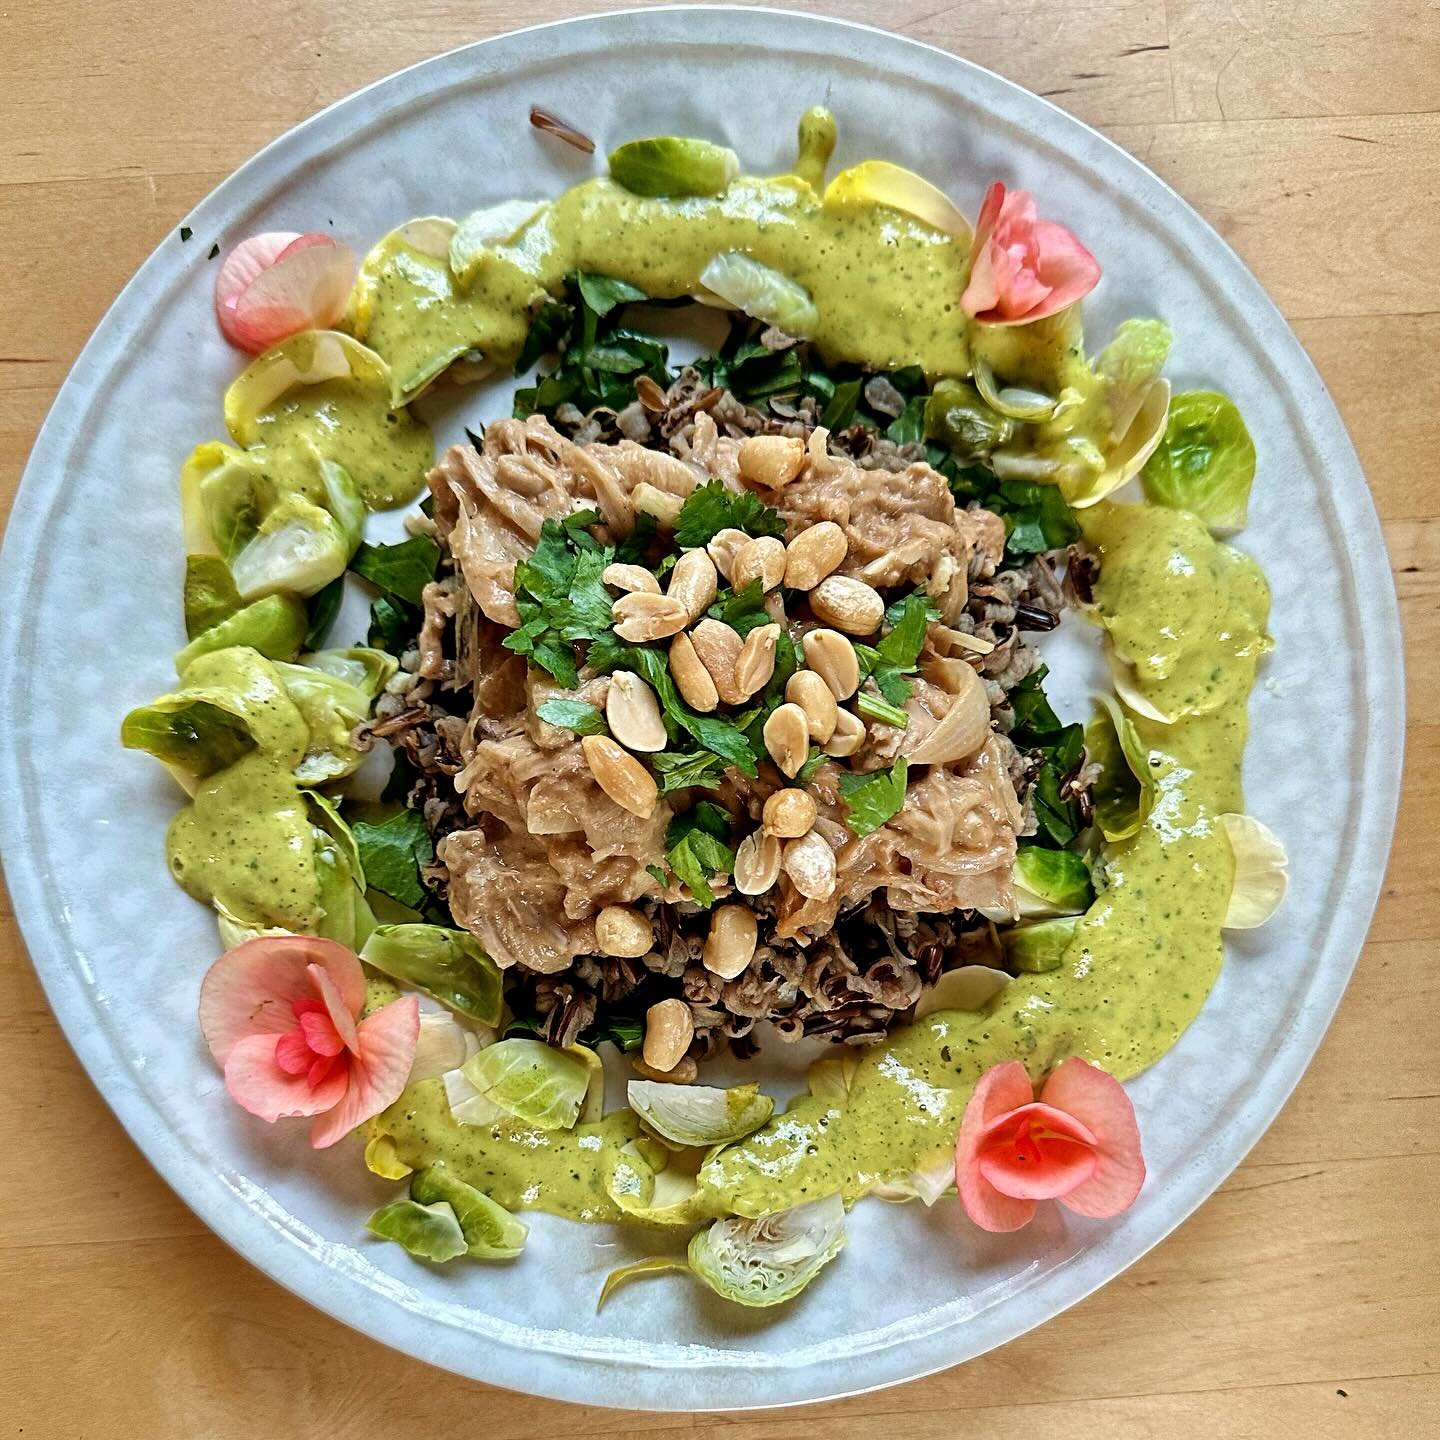 Rose petals and begonias ~ the rest of the dinner? Saut&eacute;ed savory peanut jackfruit on top of bloomed wild rice  on top of dandelion greens, surrounded by steamed Brussels sprouts on rose petals glazed with mint mango sauce ~ 😋

#eatmoreflower